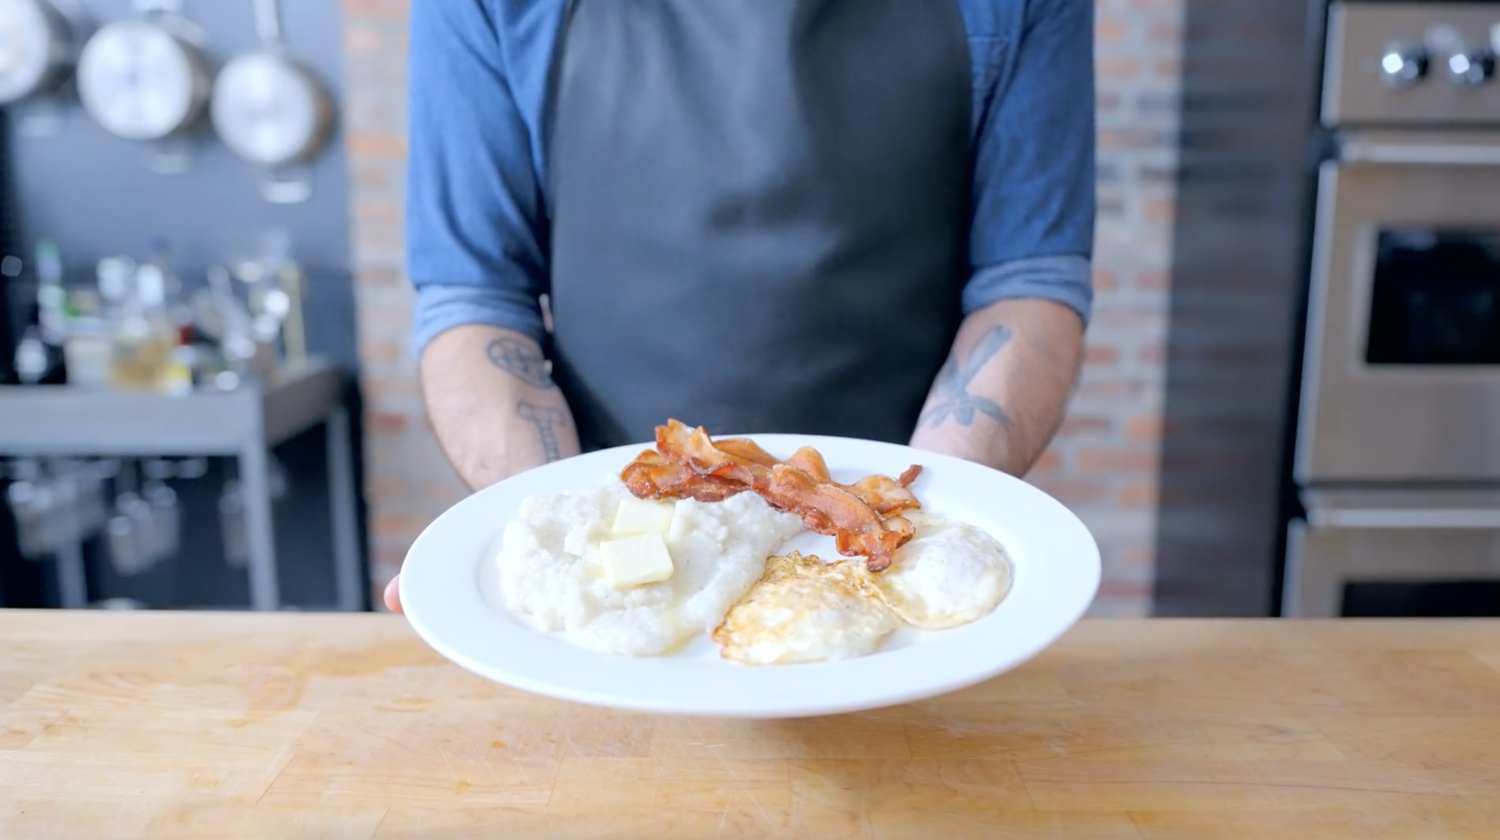 Grits inspired by My Cousin Vinny — Binging With Babish